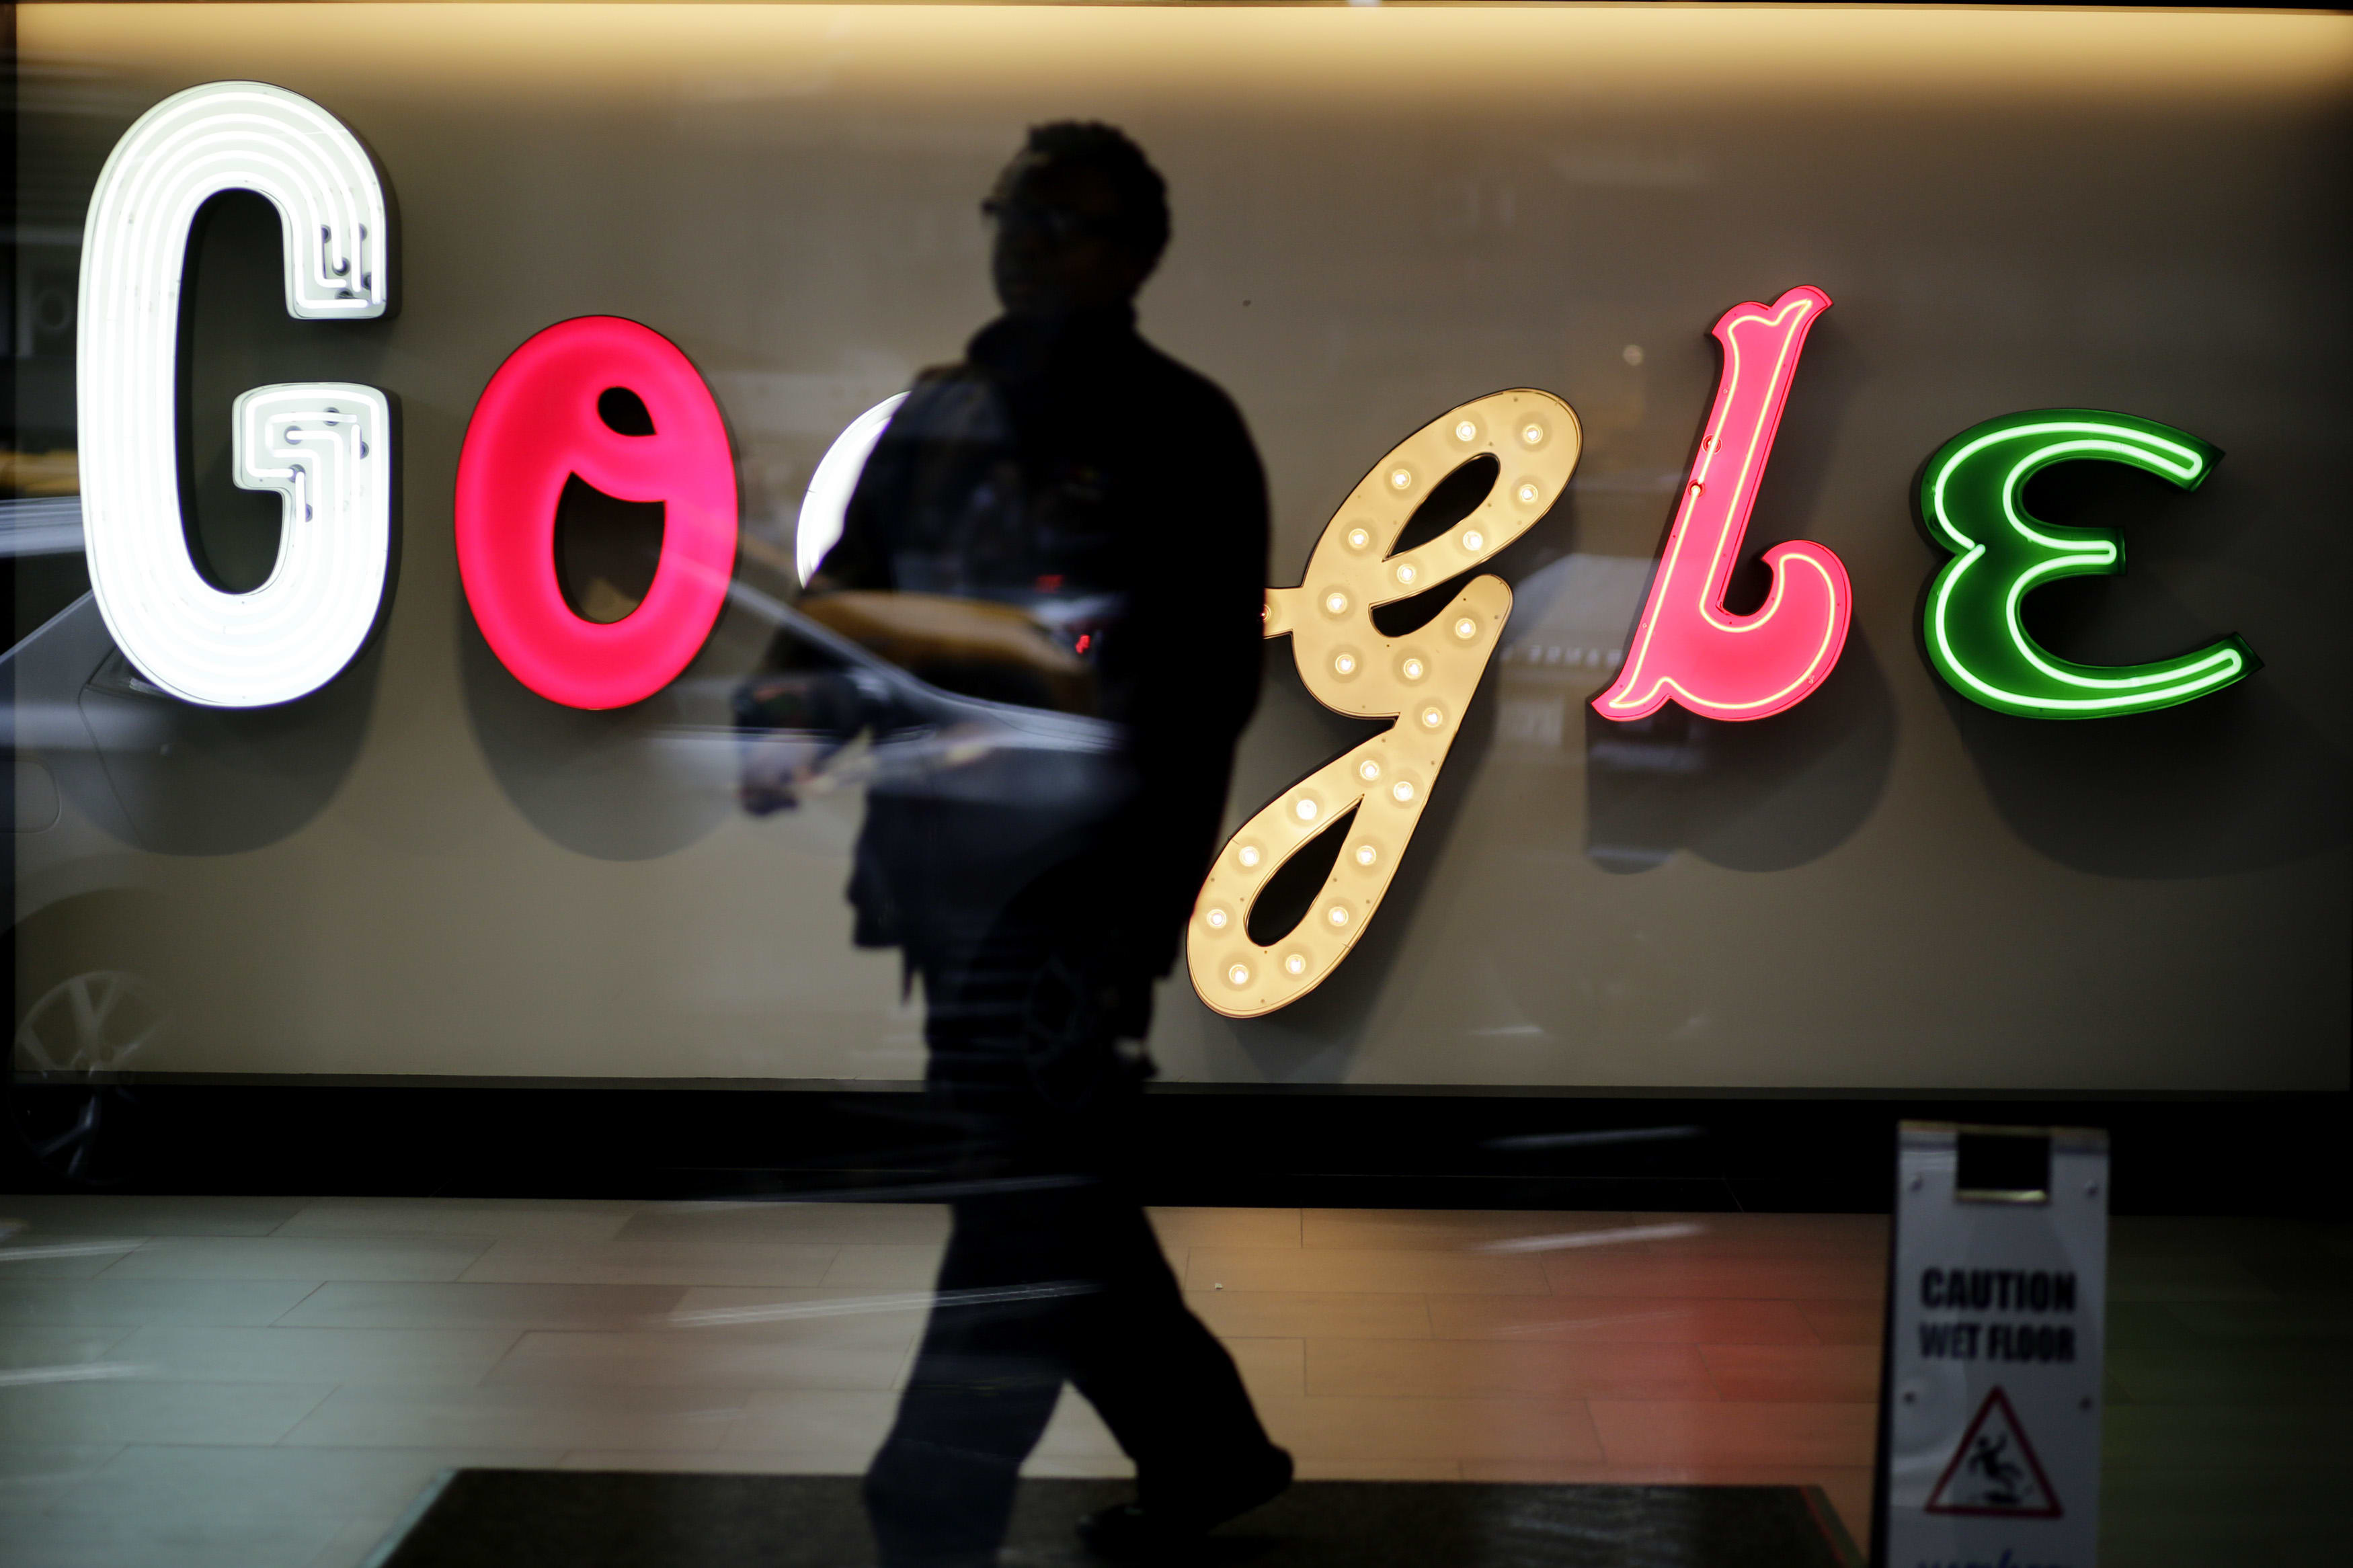 Google restricting internet access to some employees for security